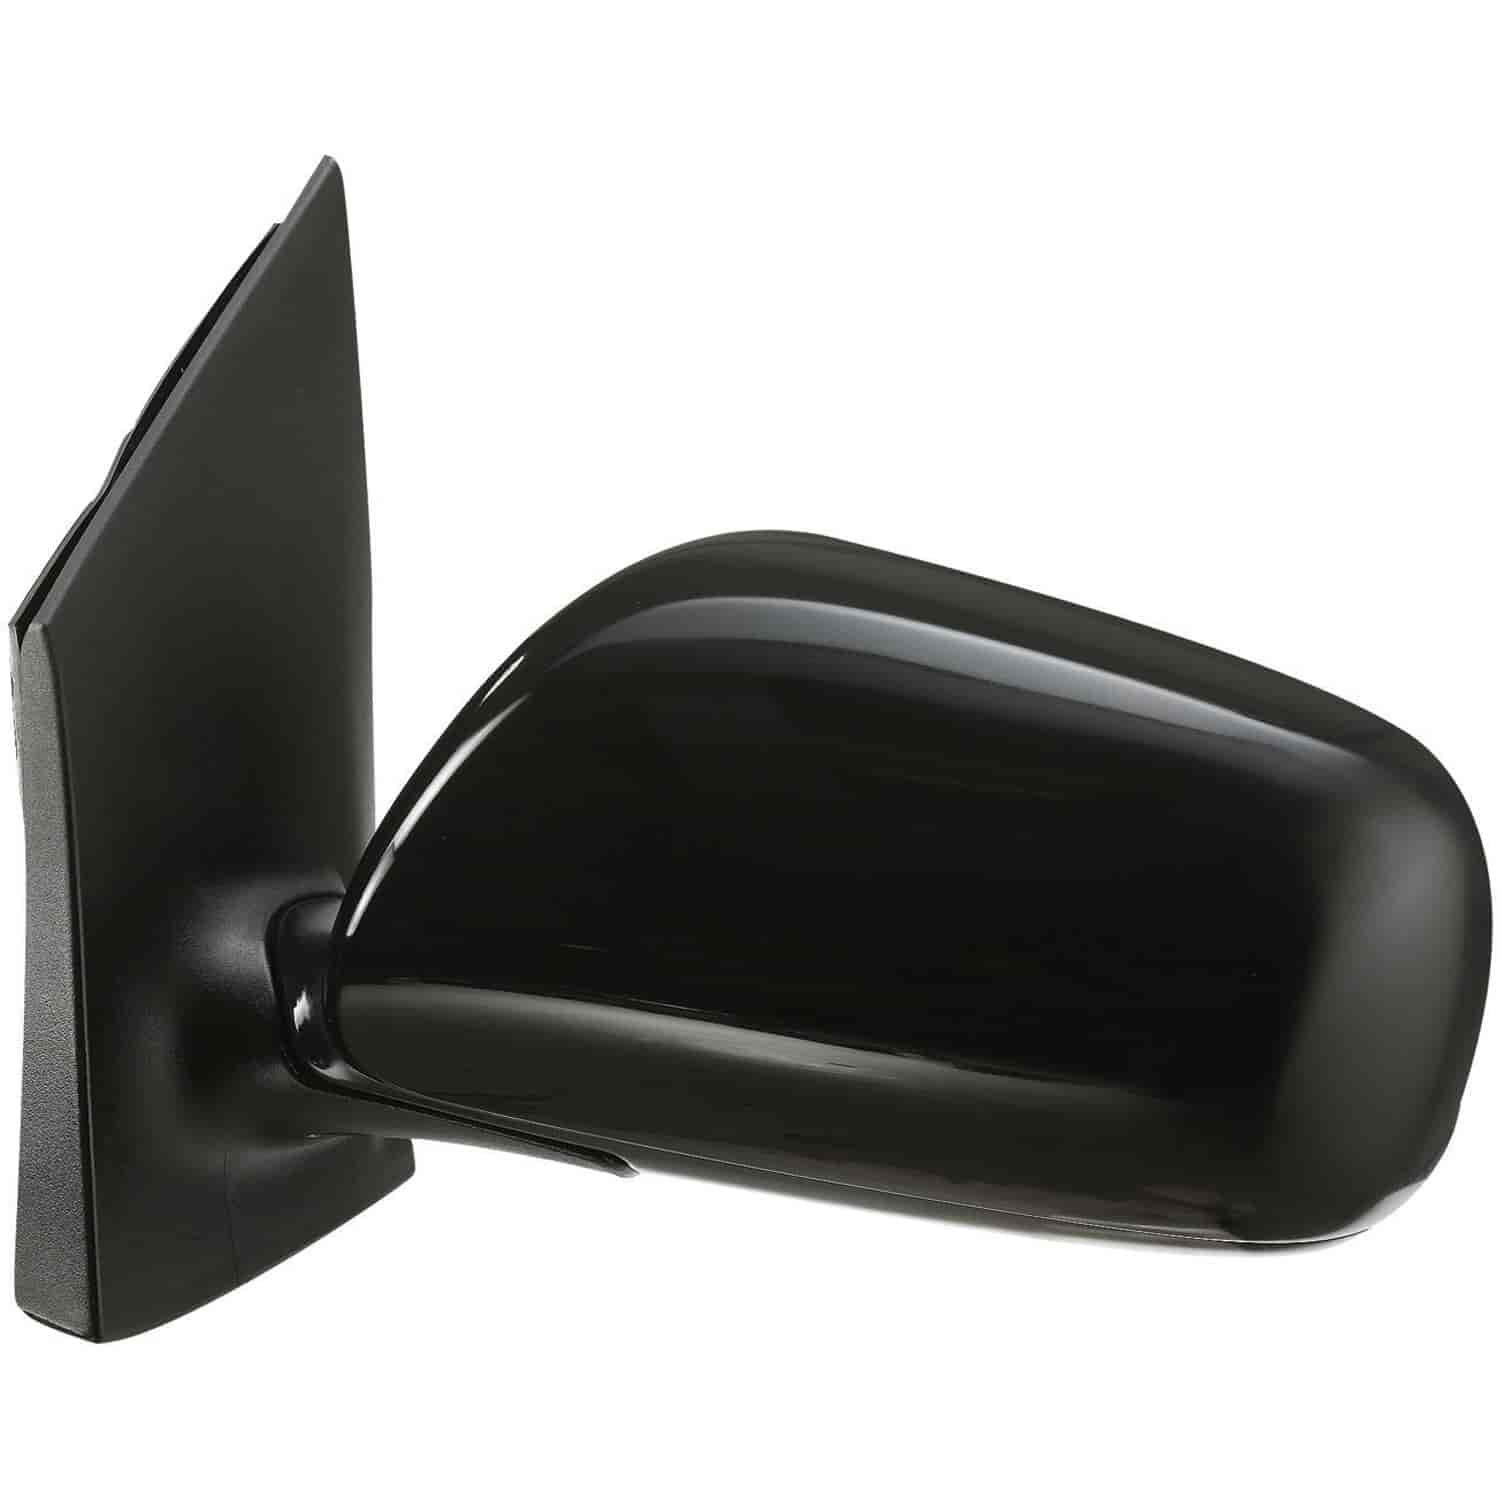 OEM Style Replacement mirror for 07-11 Toyota Yaris Sedan driver side mirror tested to fit and funct